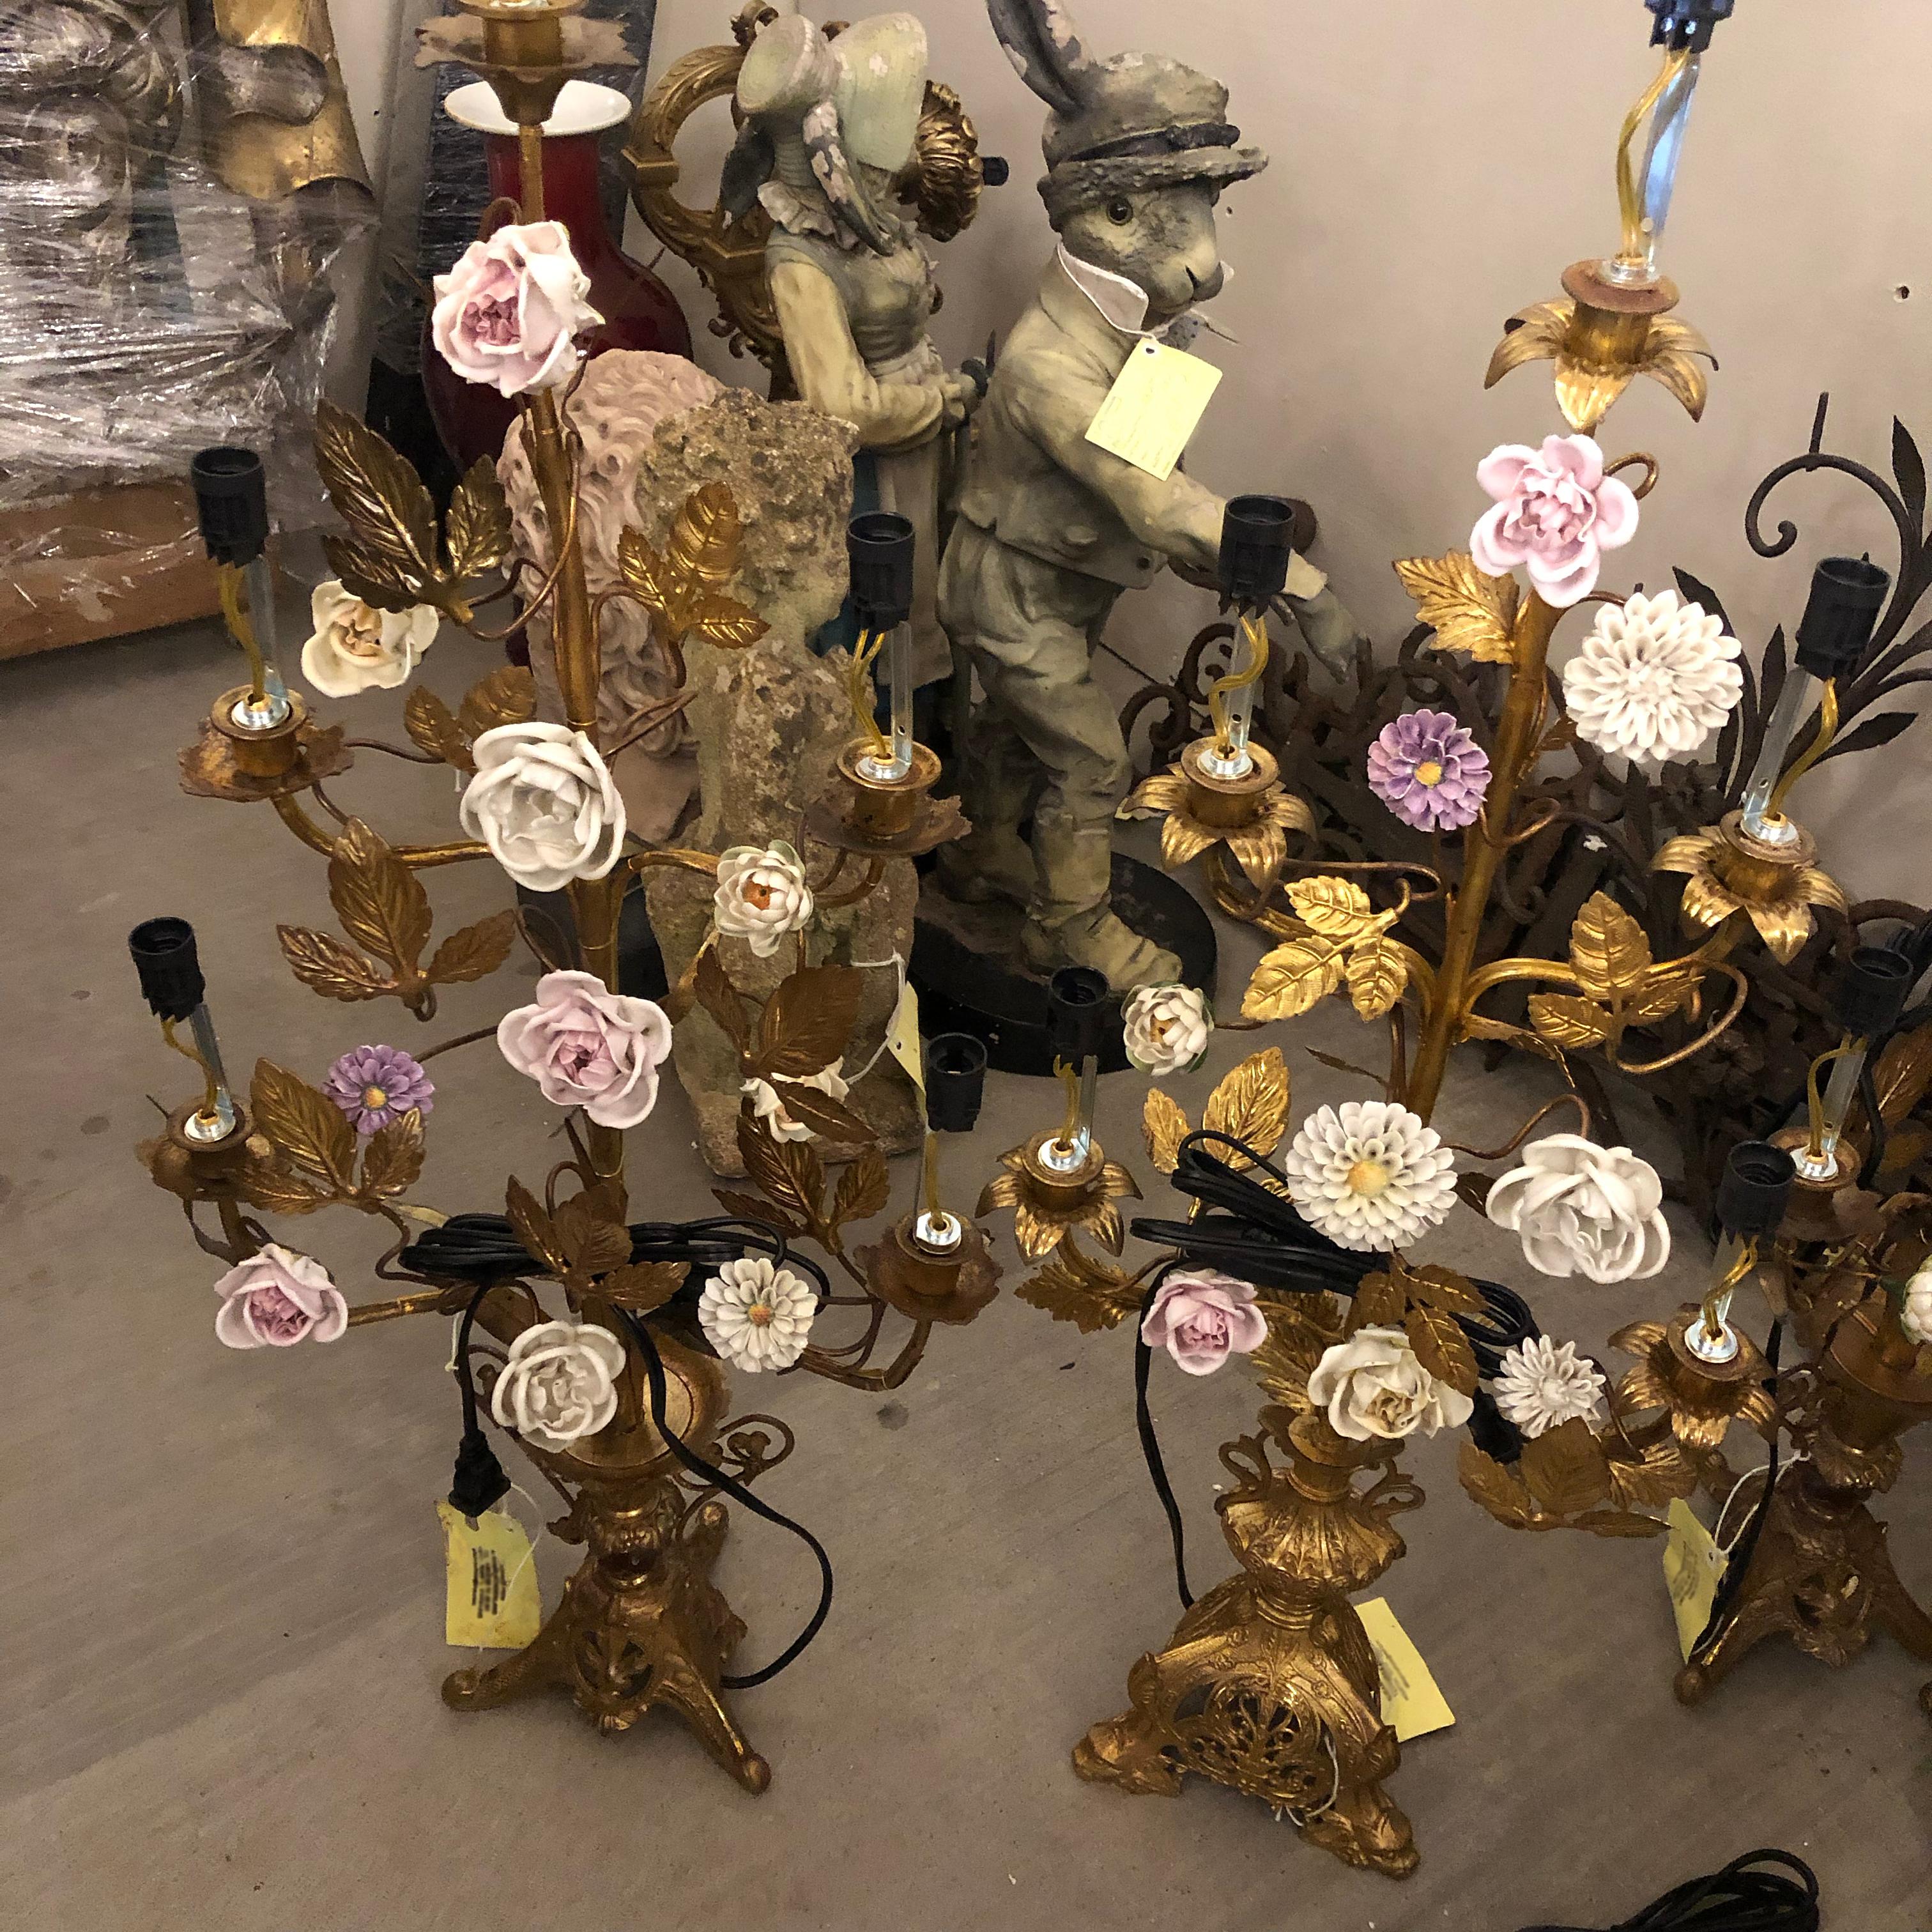 This is a set of four exceptional mood-creating church table candelabras or girandoles with the delightful addition of mixed porcelain flowers. 
The girandoles have been converted from the original candles to candlelights. 
The particular candle